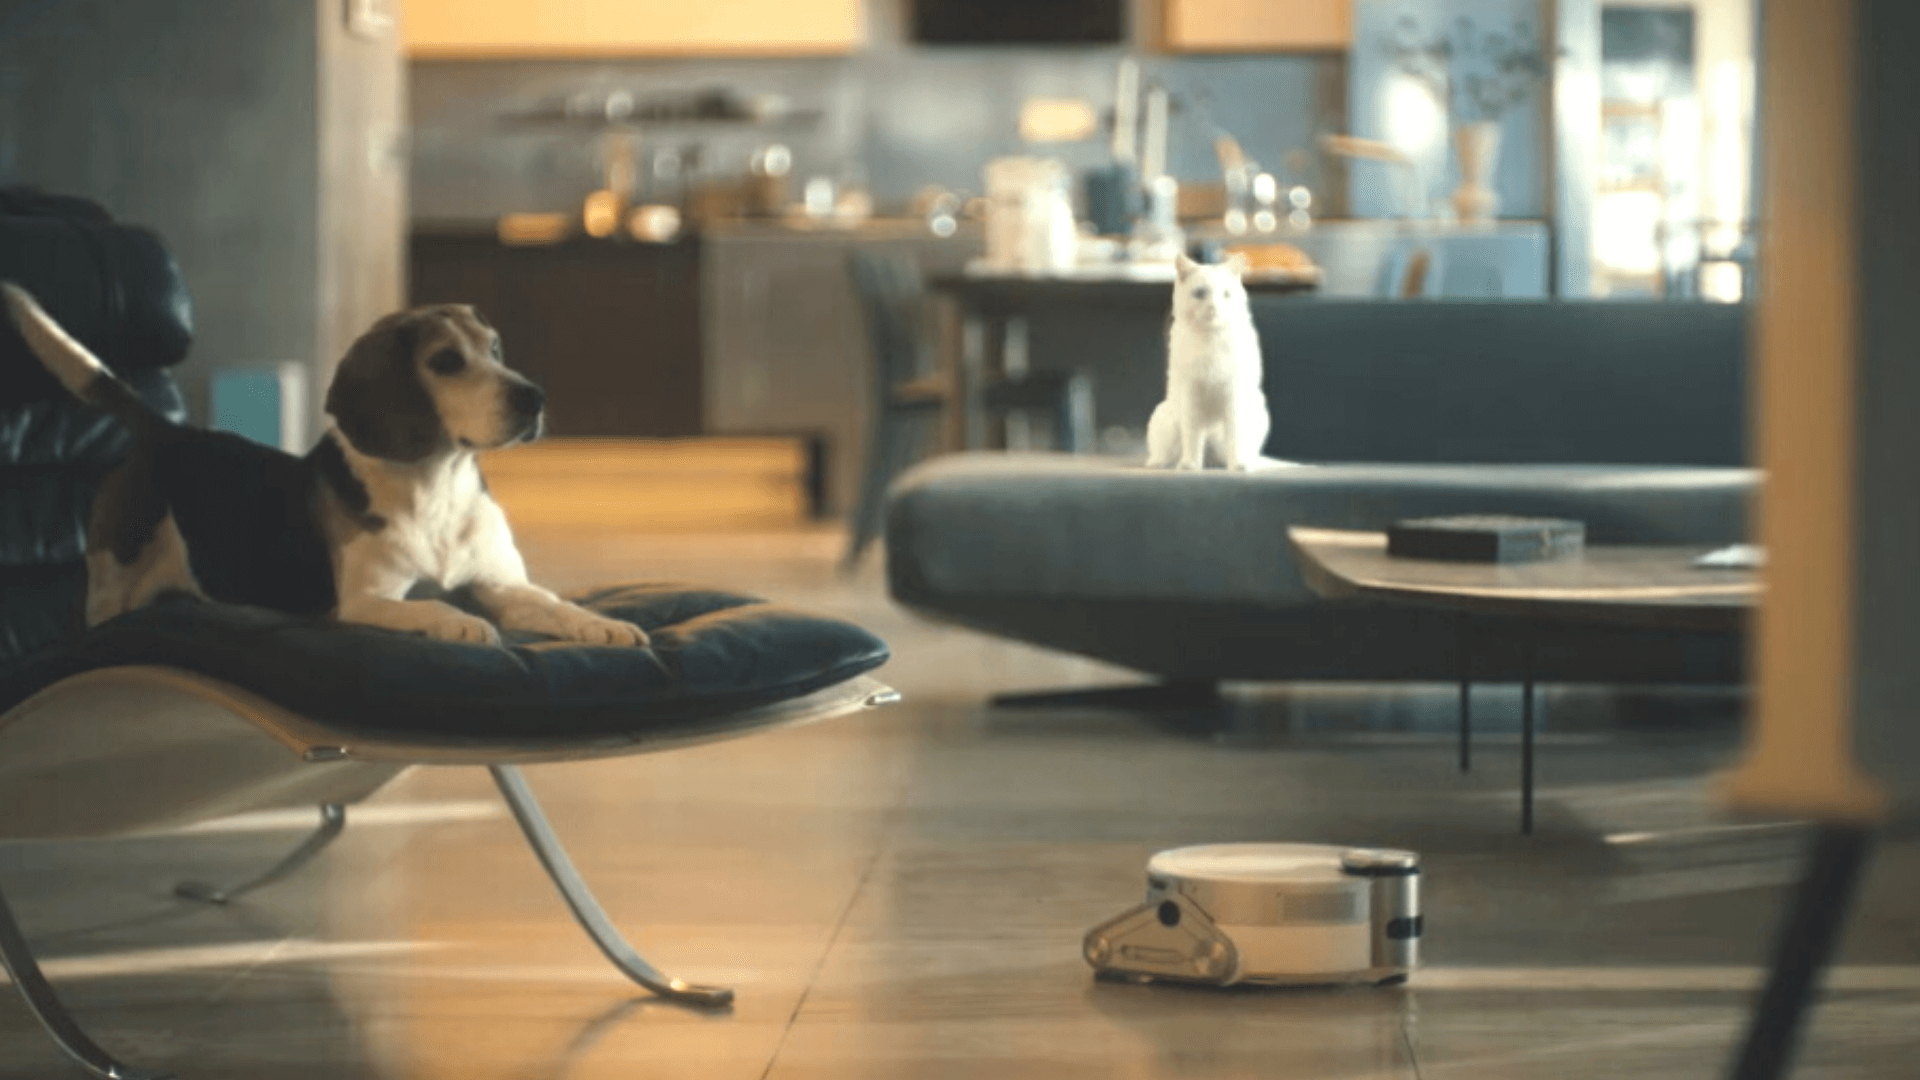 Tech giants enter pet care field with specialized home appliances